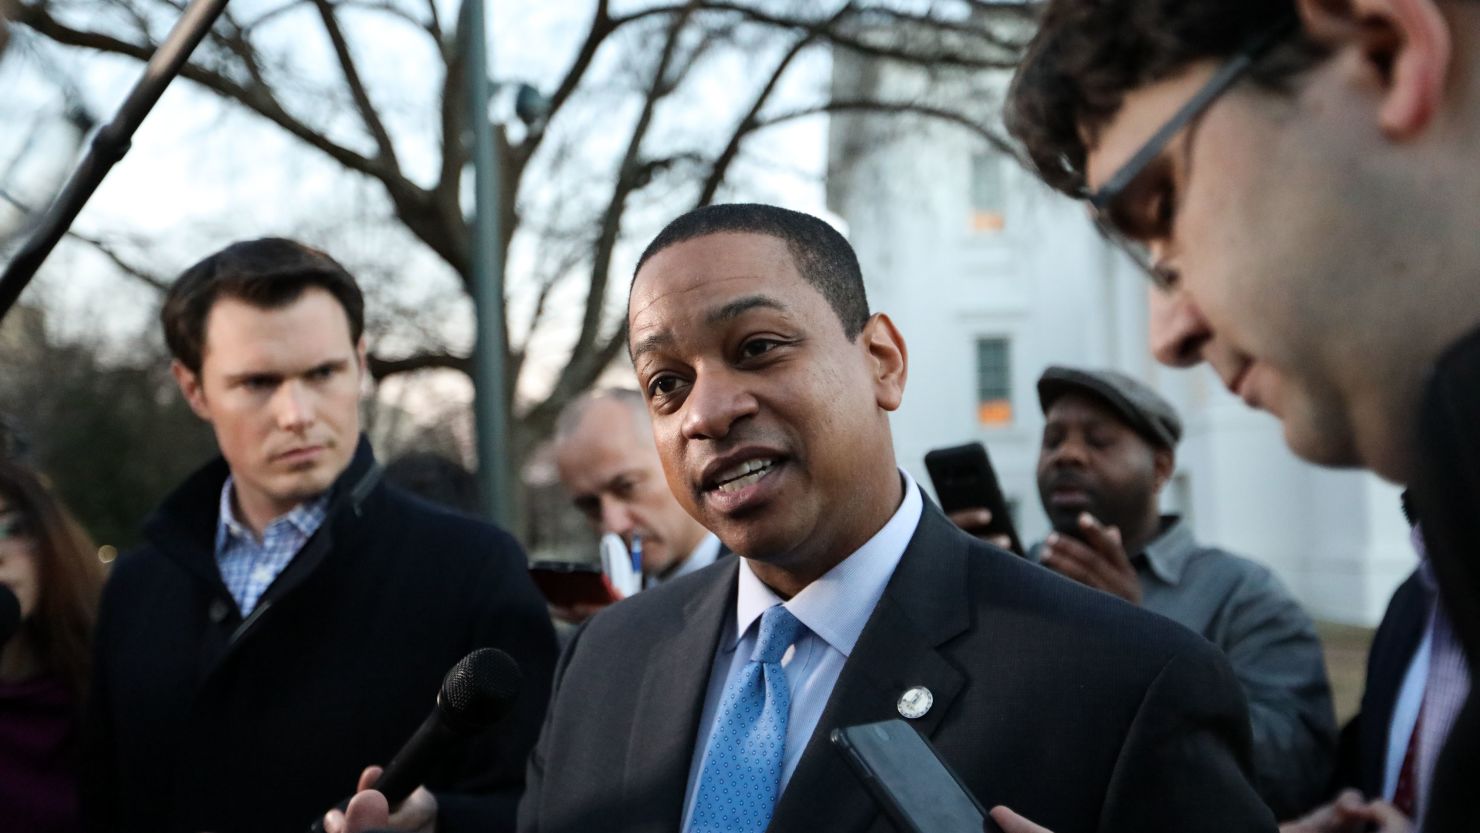 Virginia Lieutenant Governor Justin Fairfax addresses the media about a sexual assault allegation from 2004 outside of the Capitol in dowtown Richmond, Virginia, February 4, 2019.